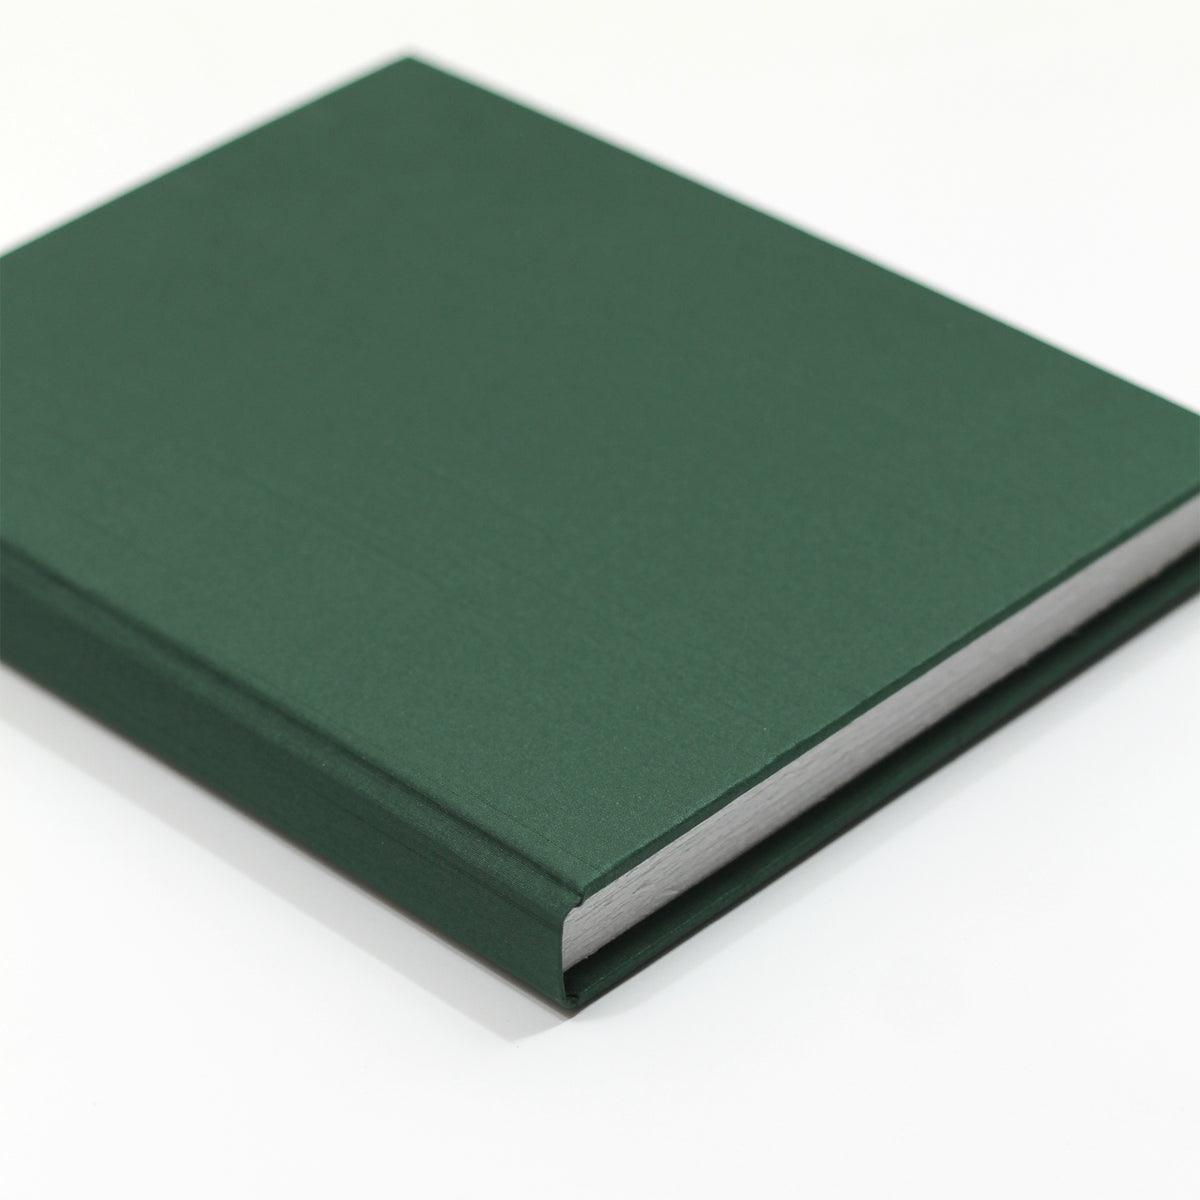 Large 8x10 Blank Page Journal, Cover: Emerald Silk